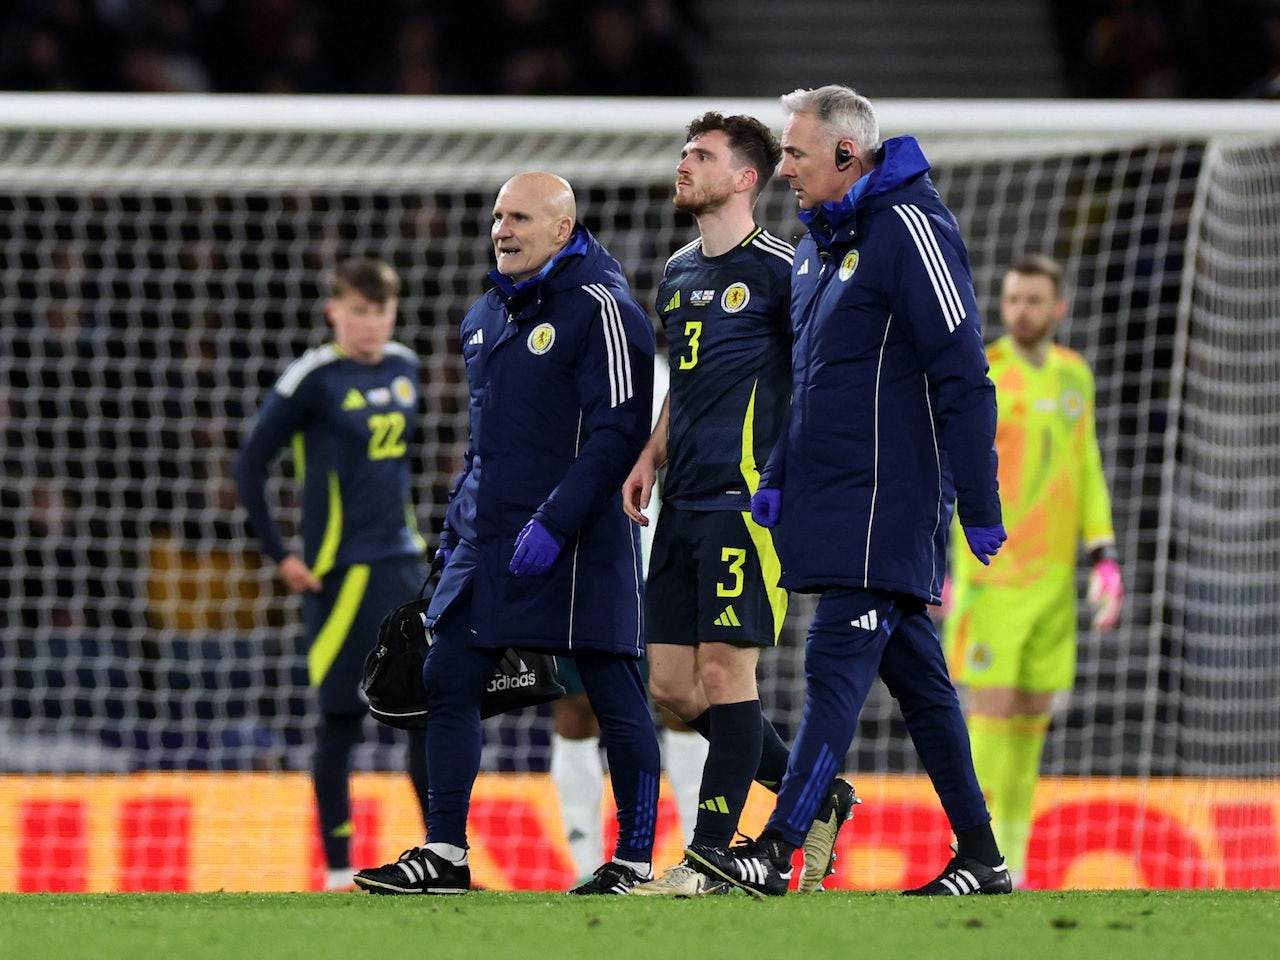 Liverpool's Andrew Robertson forced off during Scotland clash